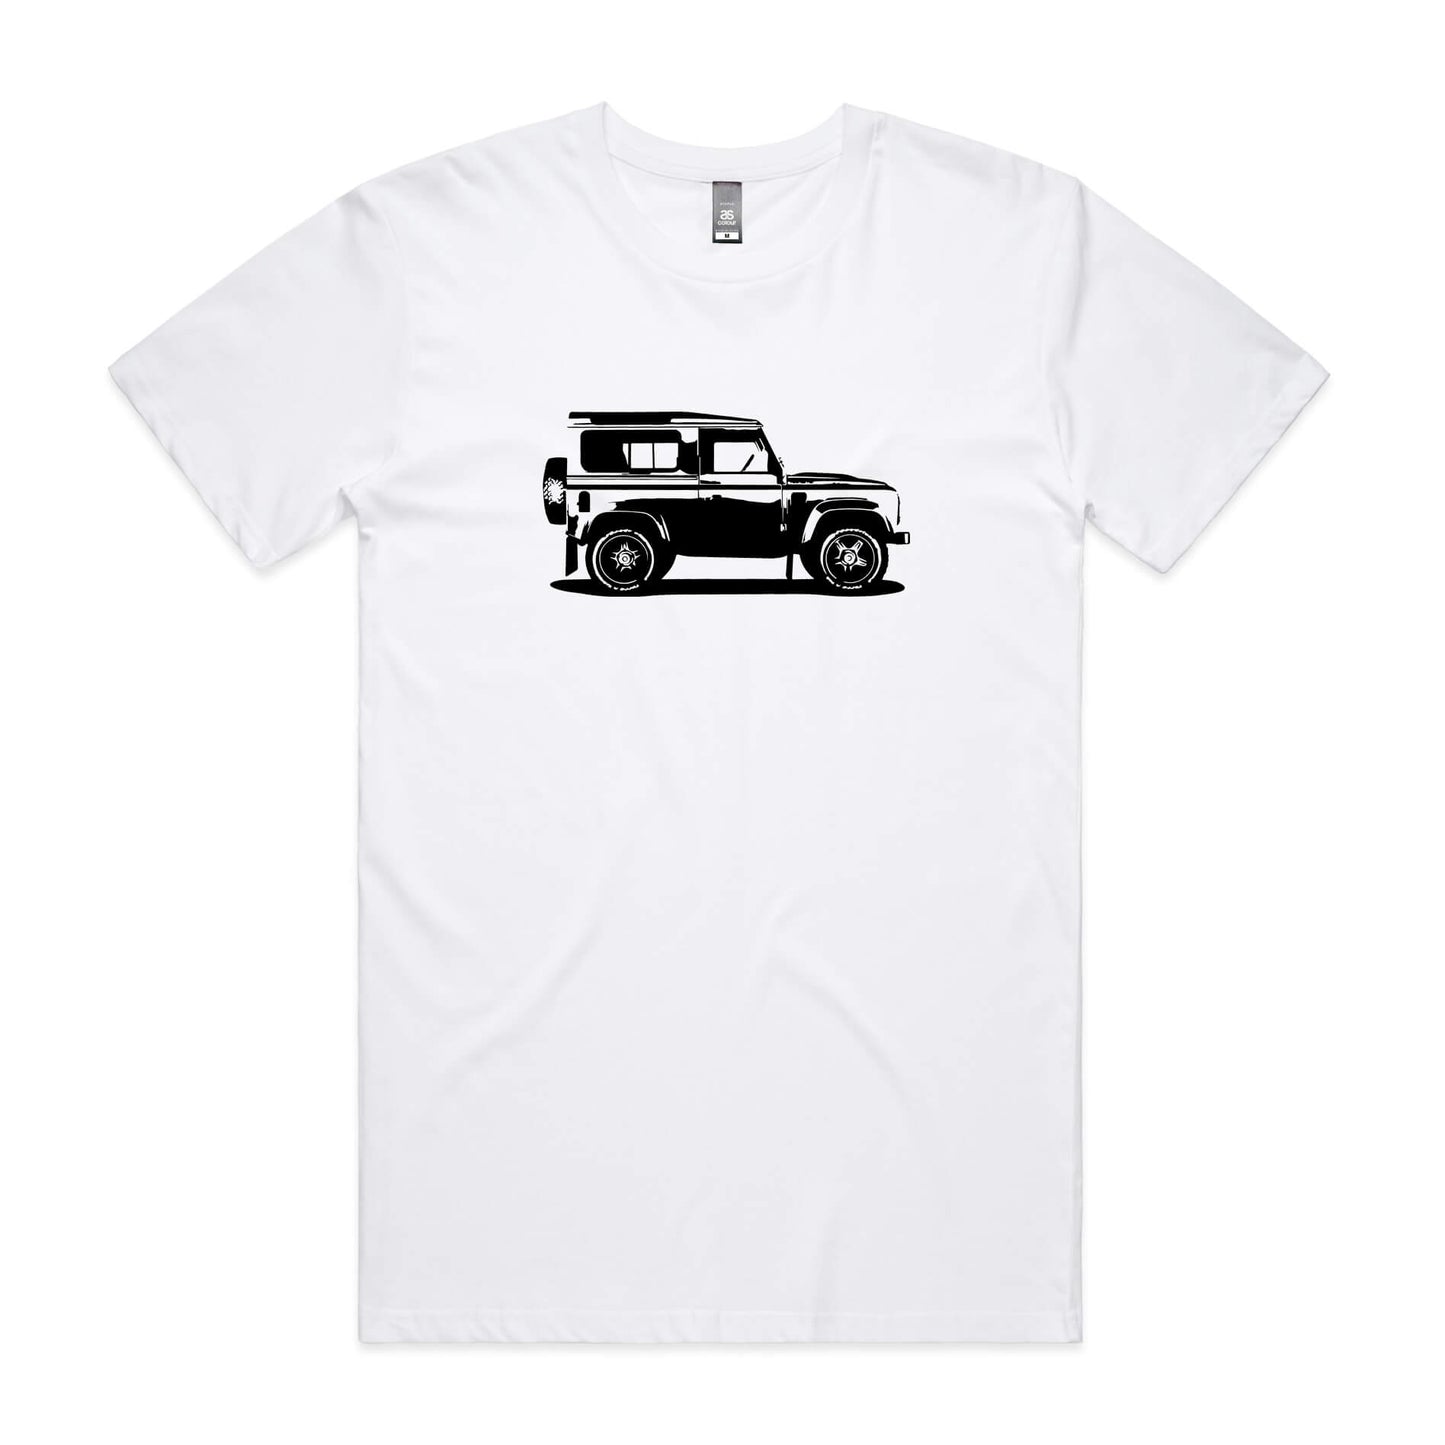 Land Rover Defender t-shirt in white